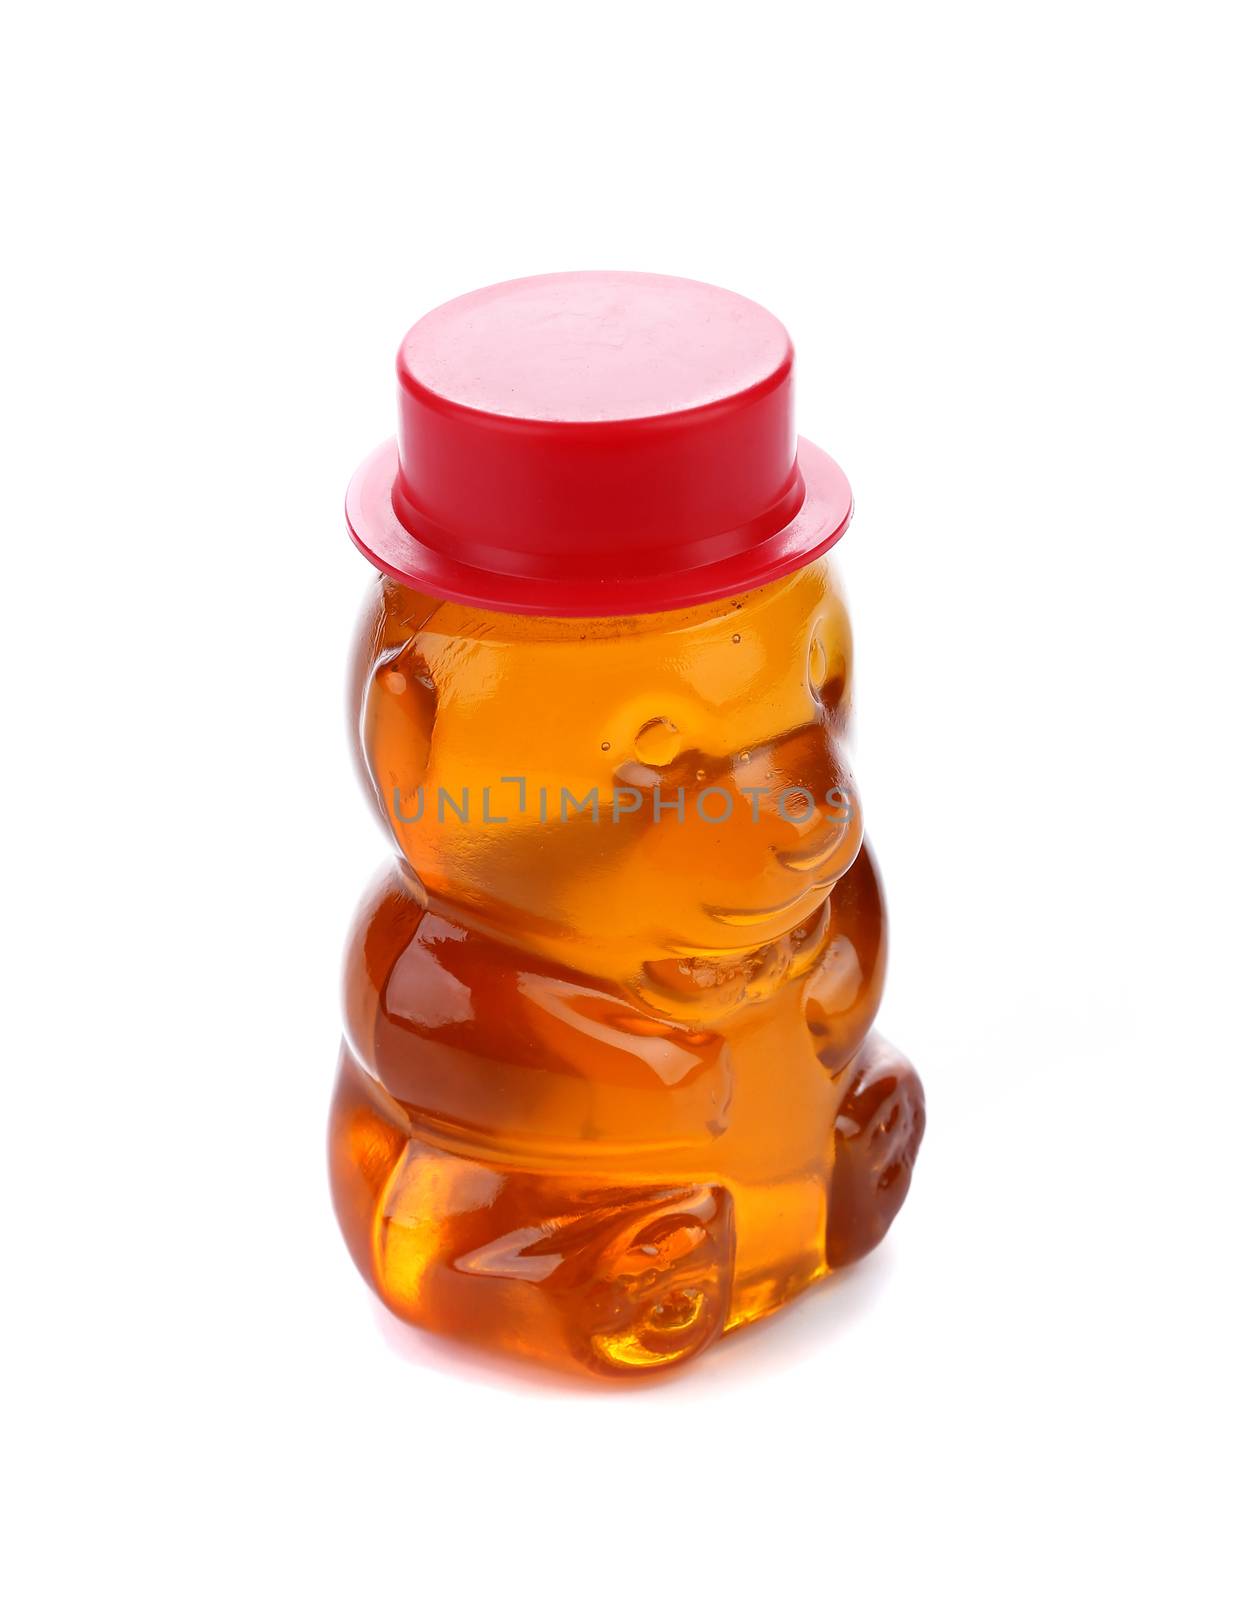 Bottle shaped like a bear and filled with honey. White bckground.